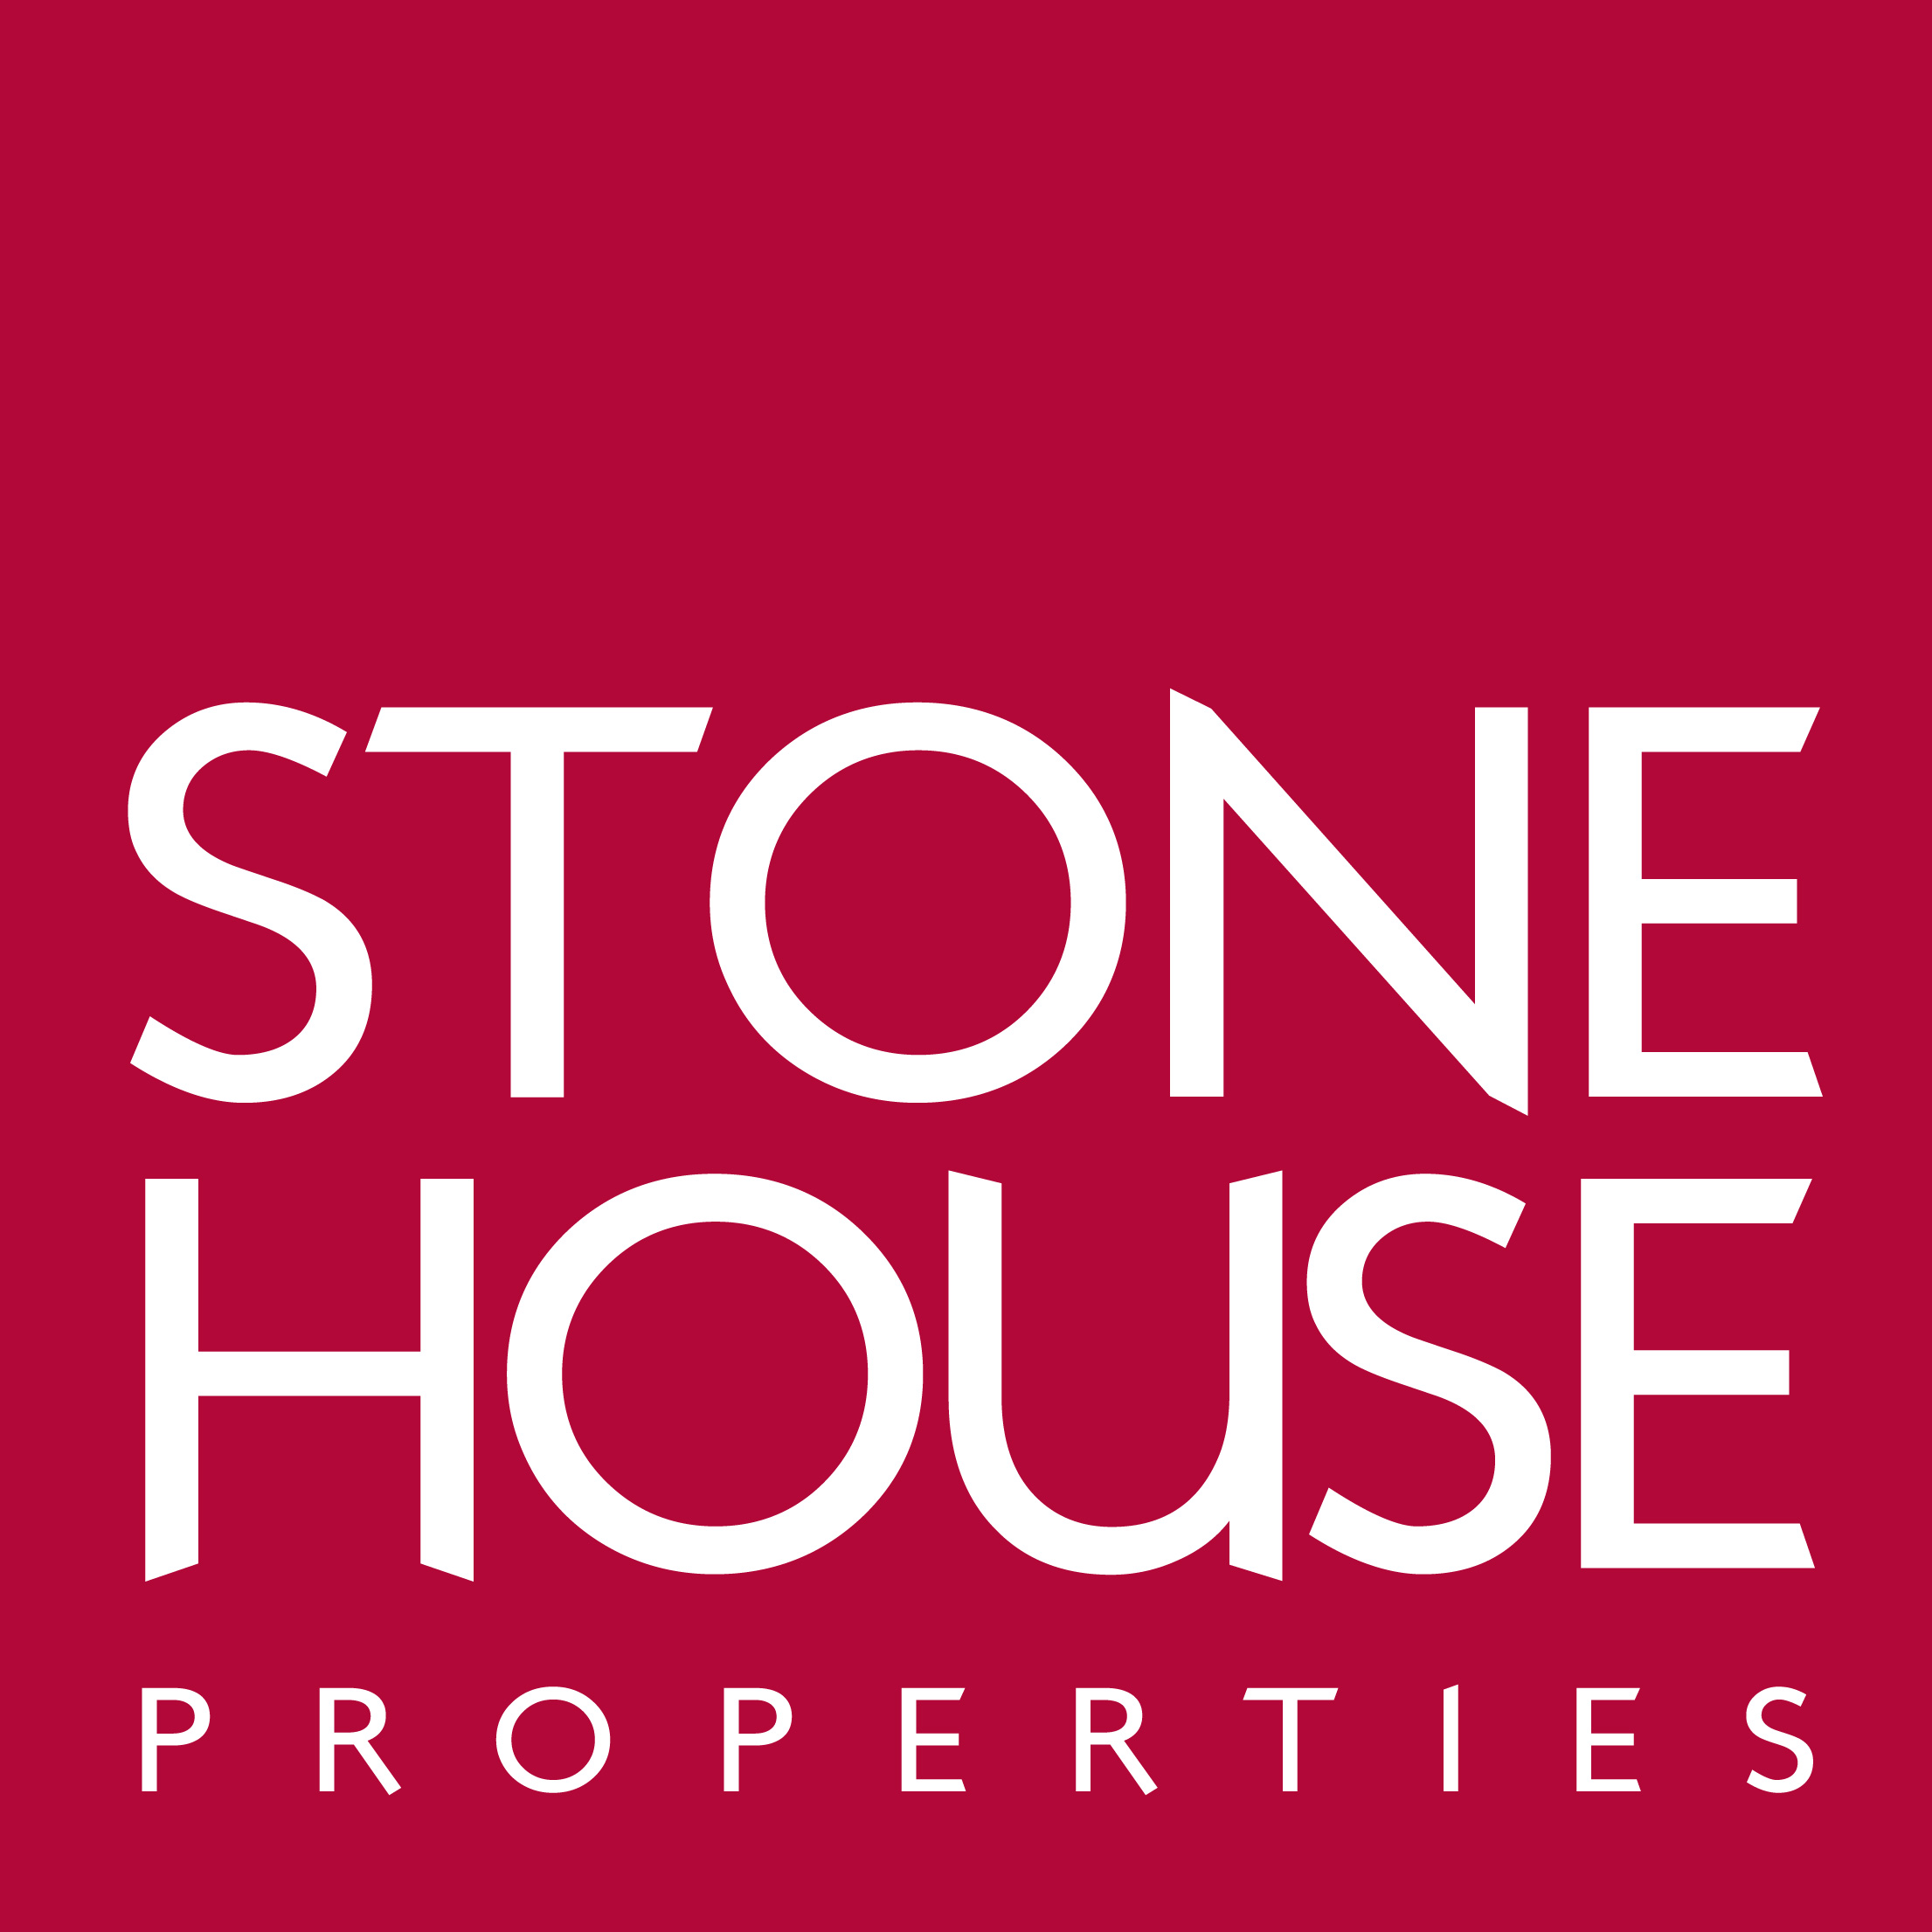 why stonehouse image